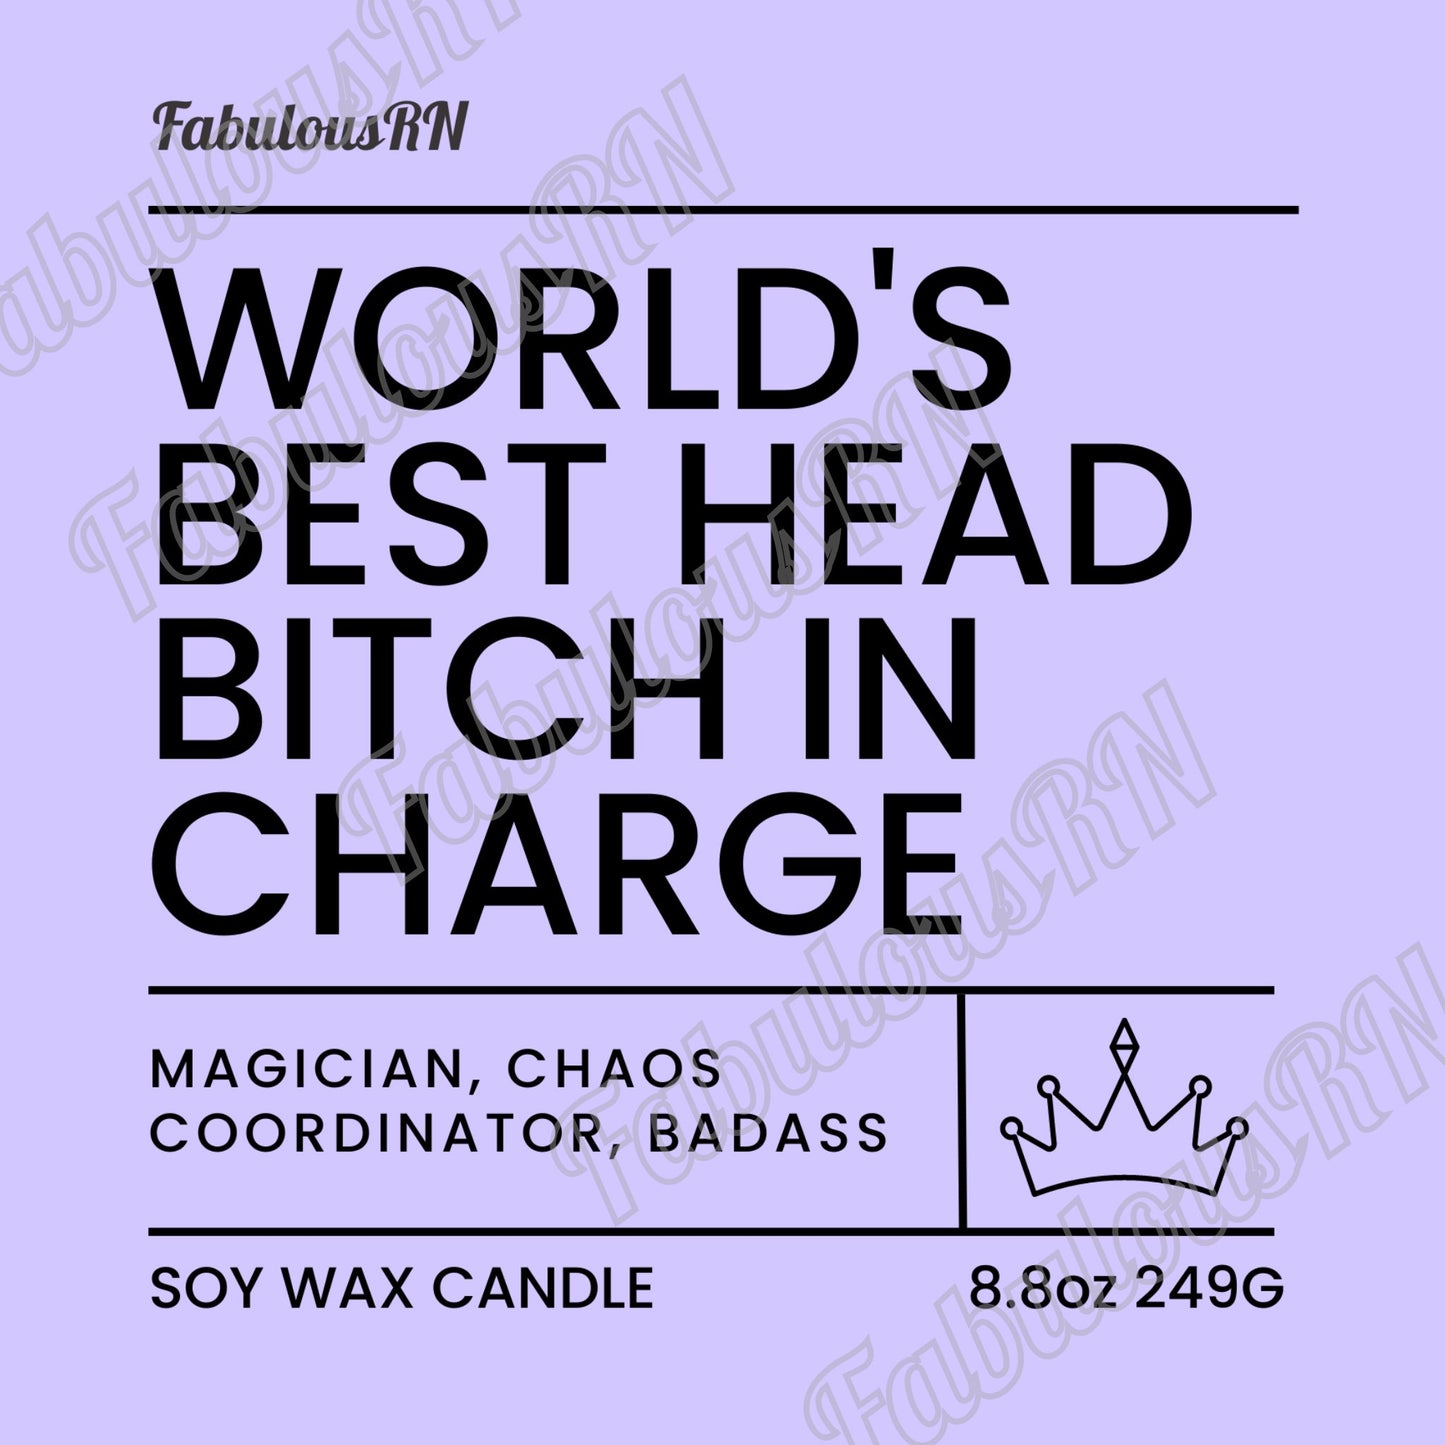 World's Best Head Bitch in Charge